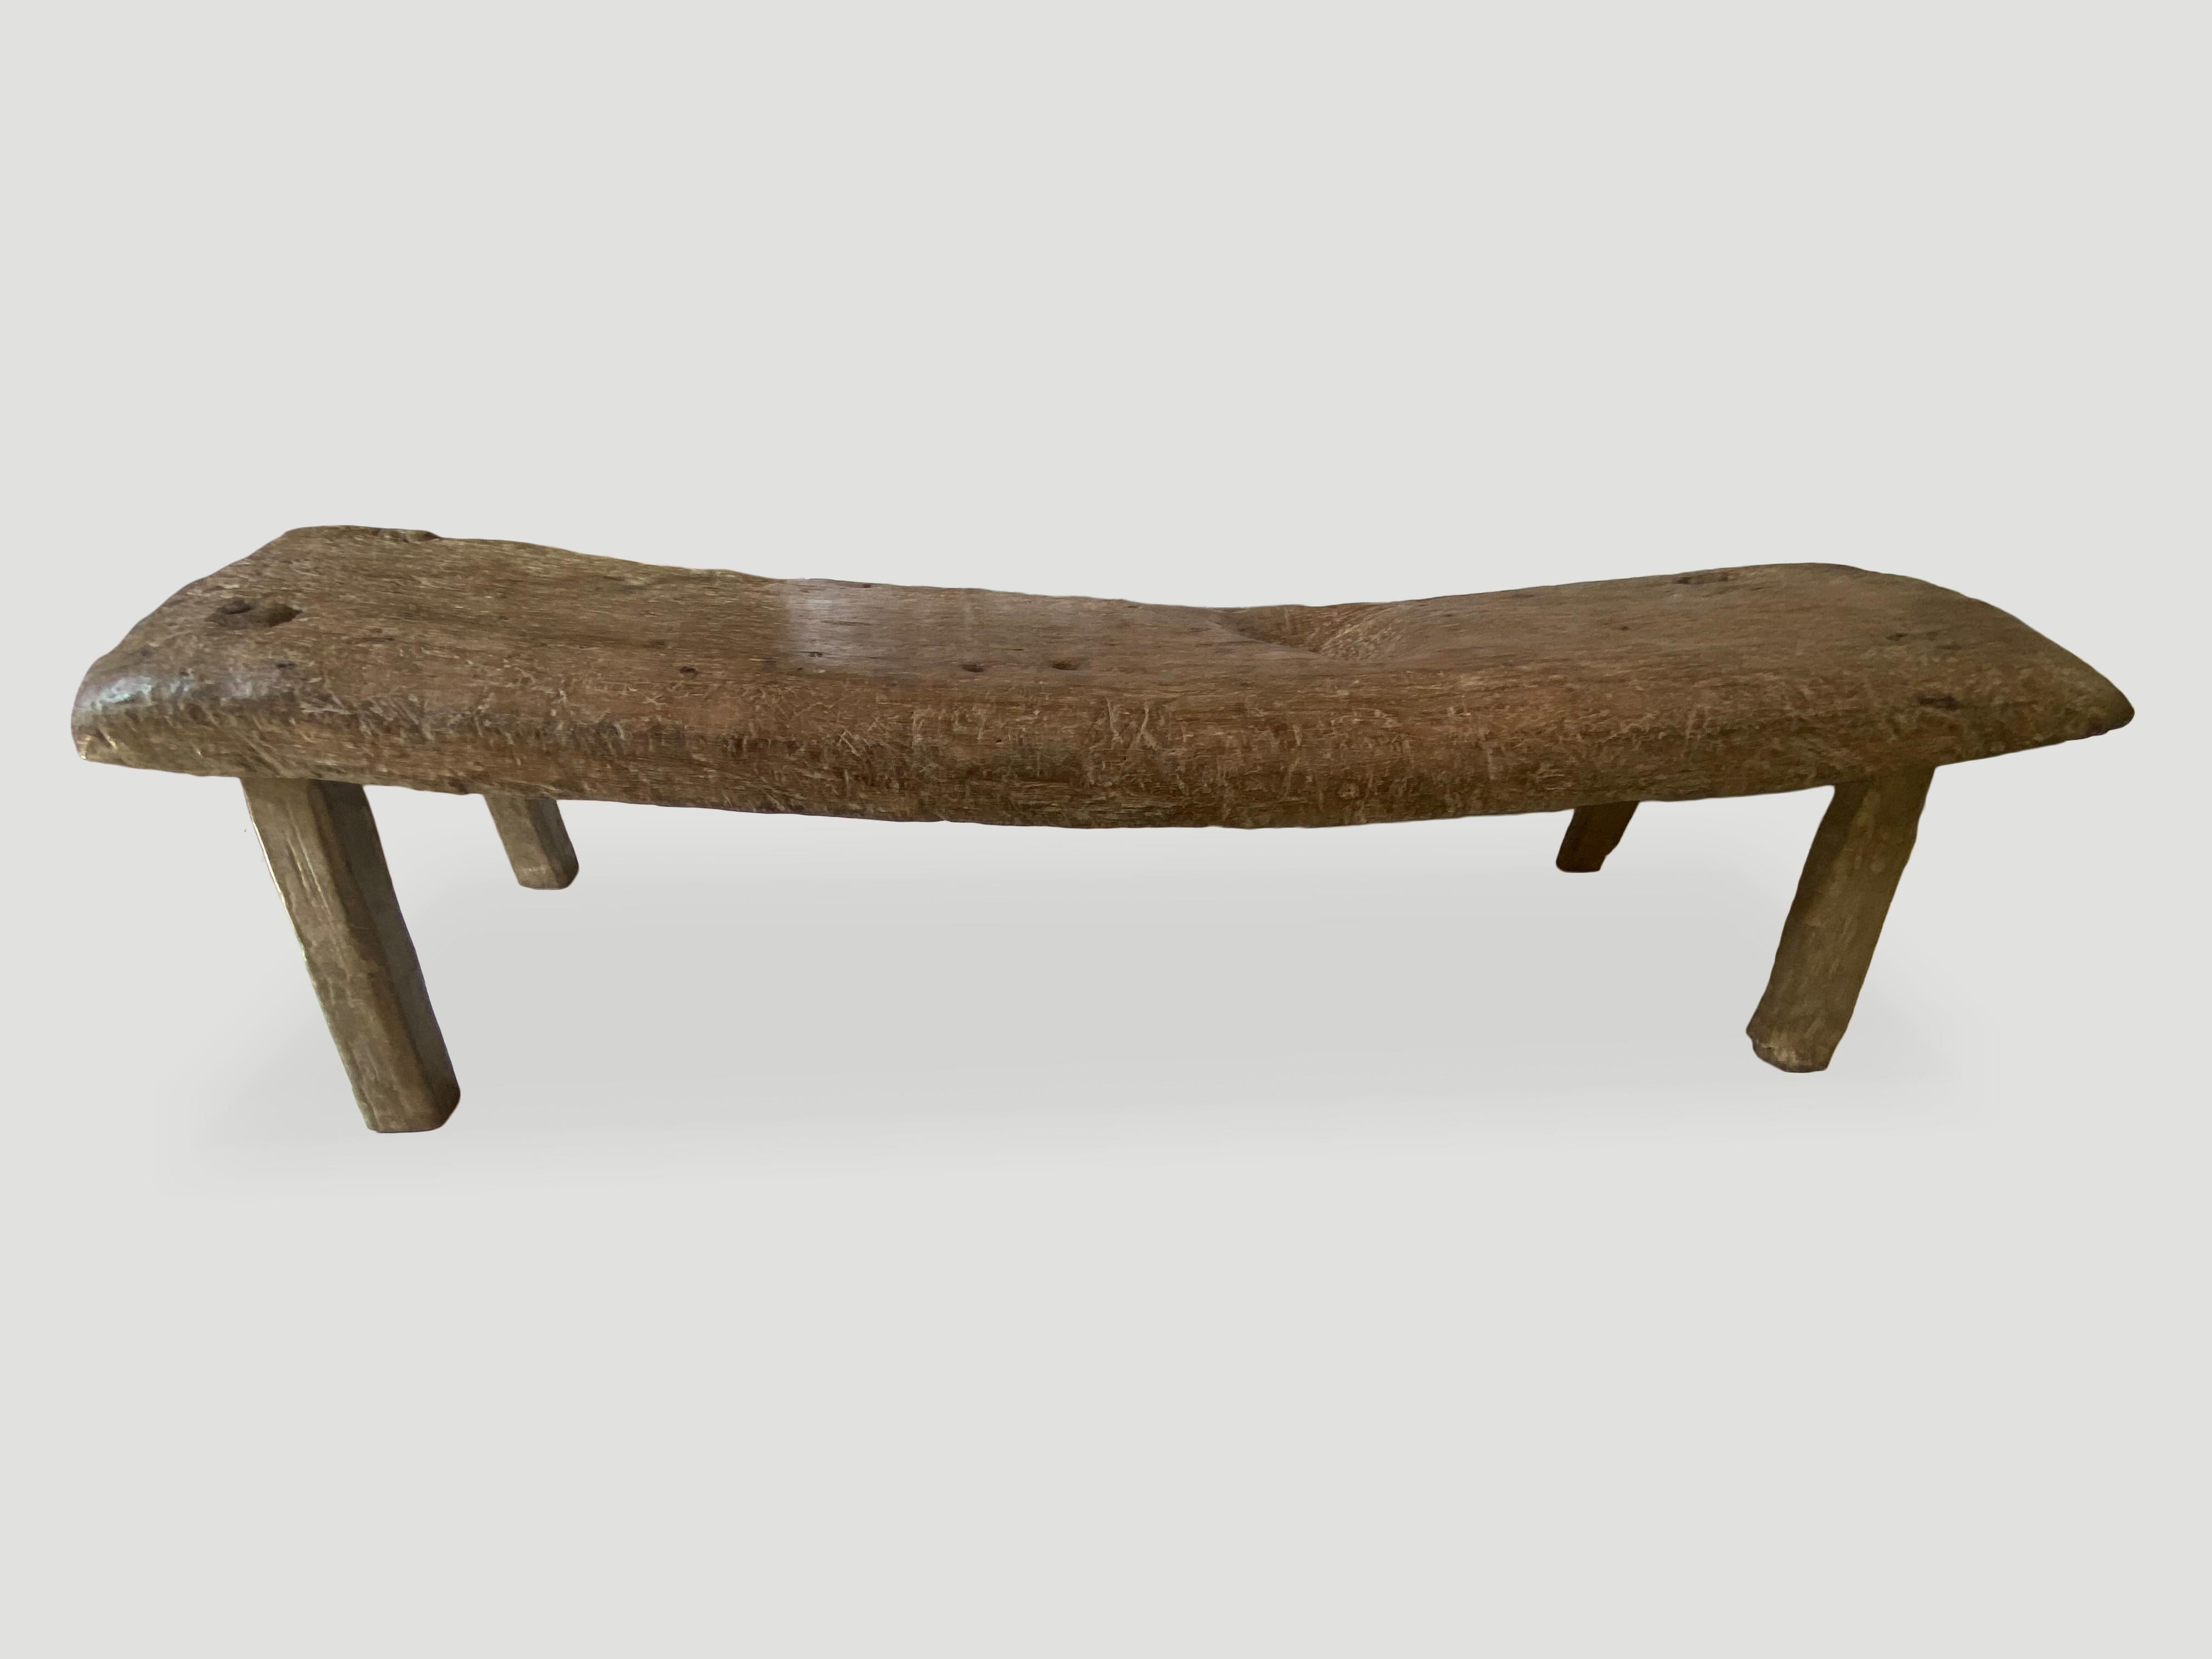 For the collector. This stunning three inch thick teak slab bench has been hand carved from the island Madura. Beautiful soft rounded edges and beautiful markings on this century old bench. Rare.

This bench was sourced in the spirit of wabi-sabi, a